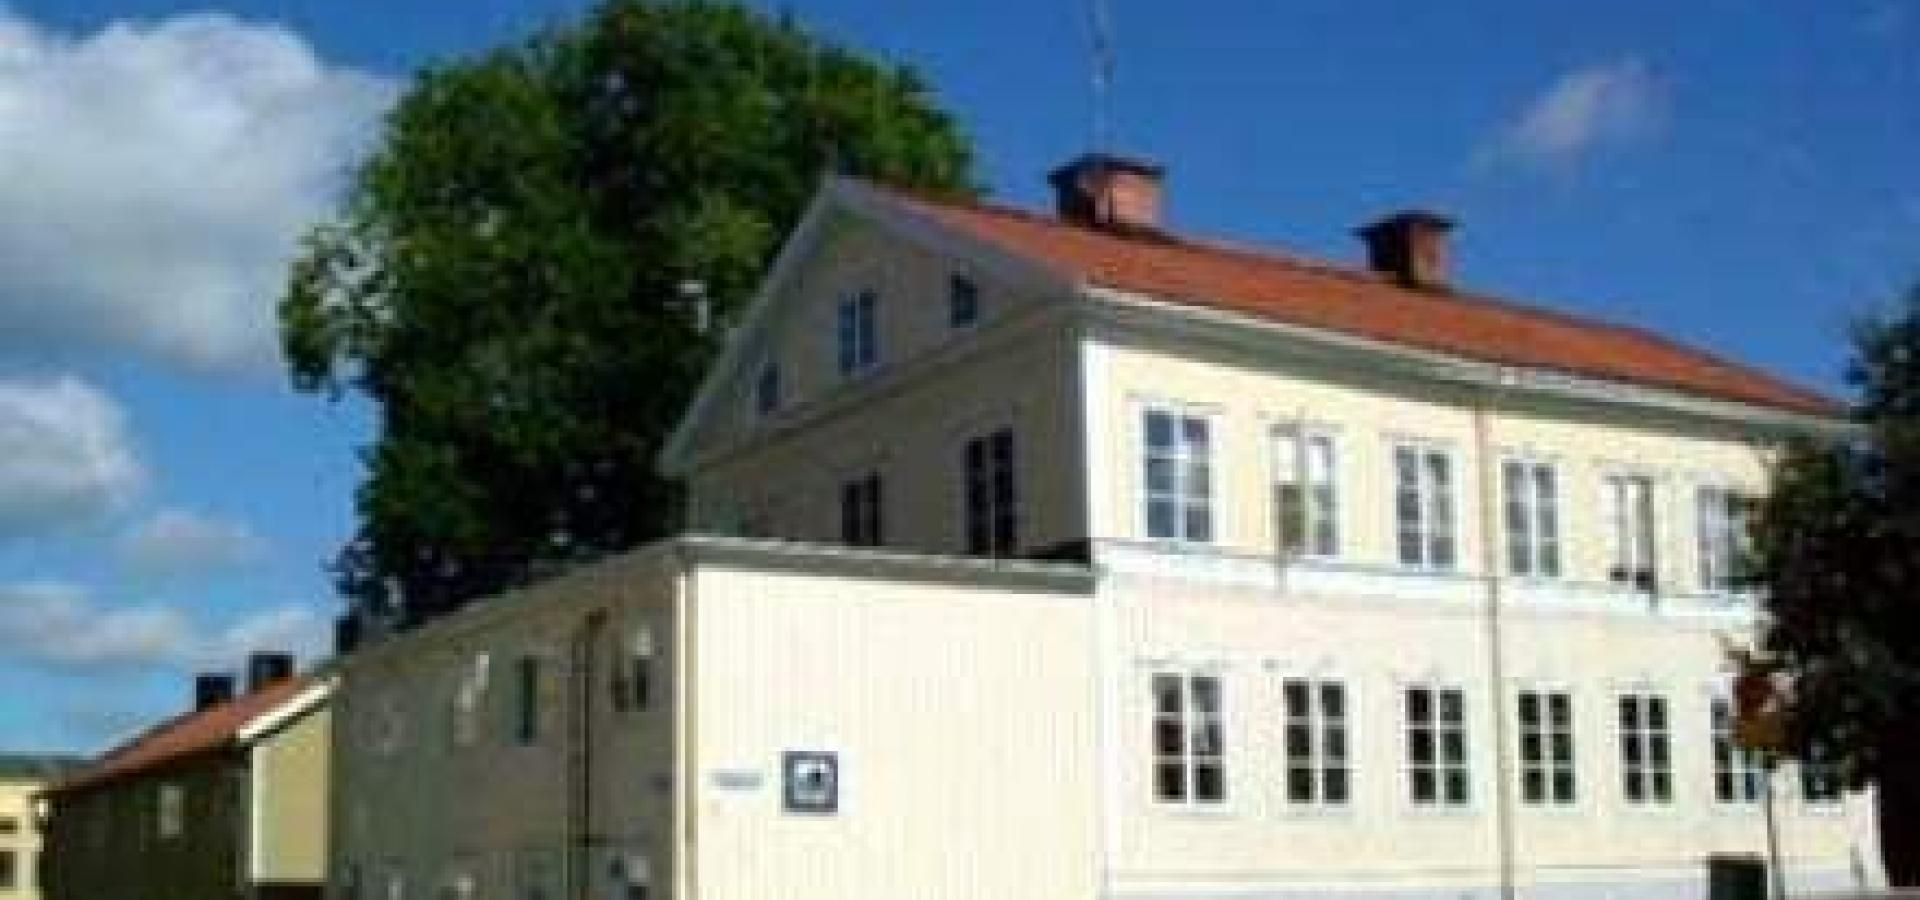 STF Hostel in the old town of Gävle